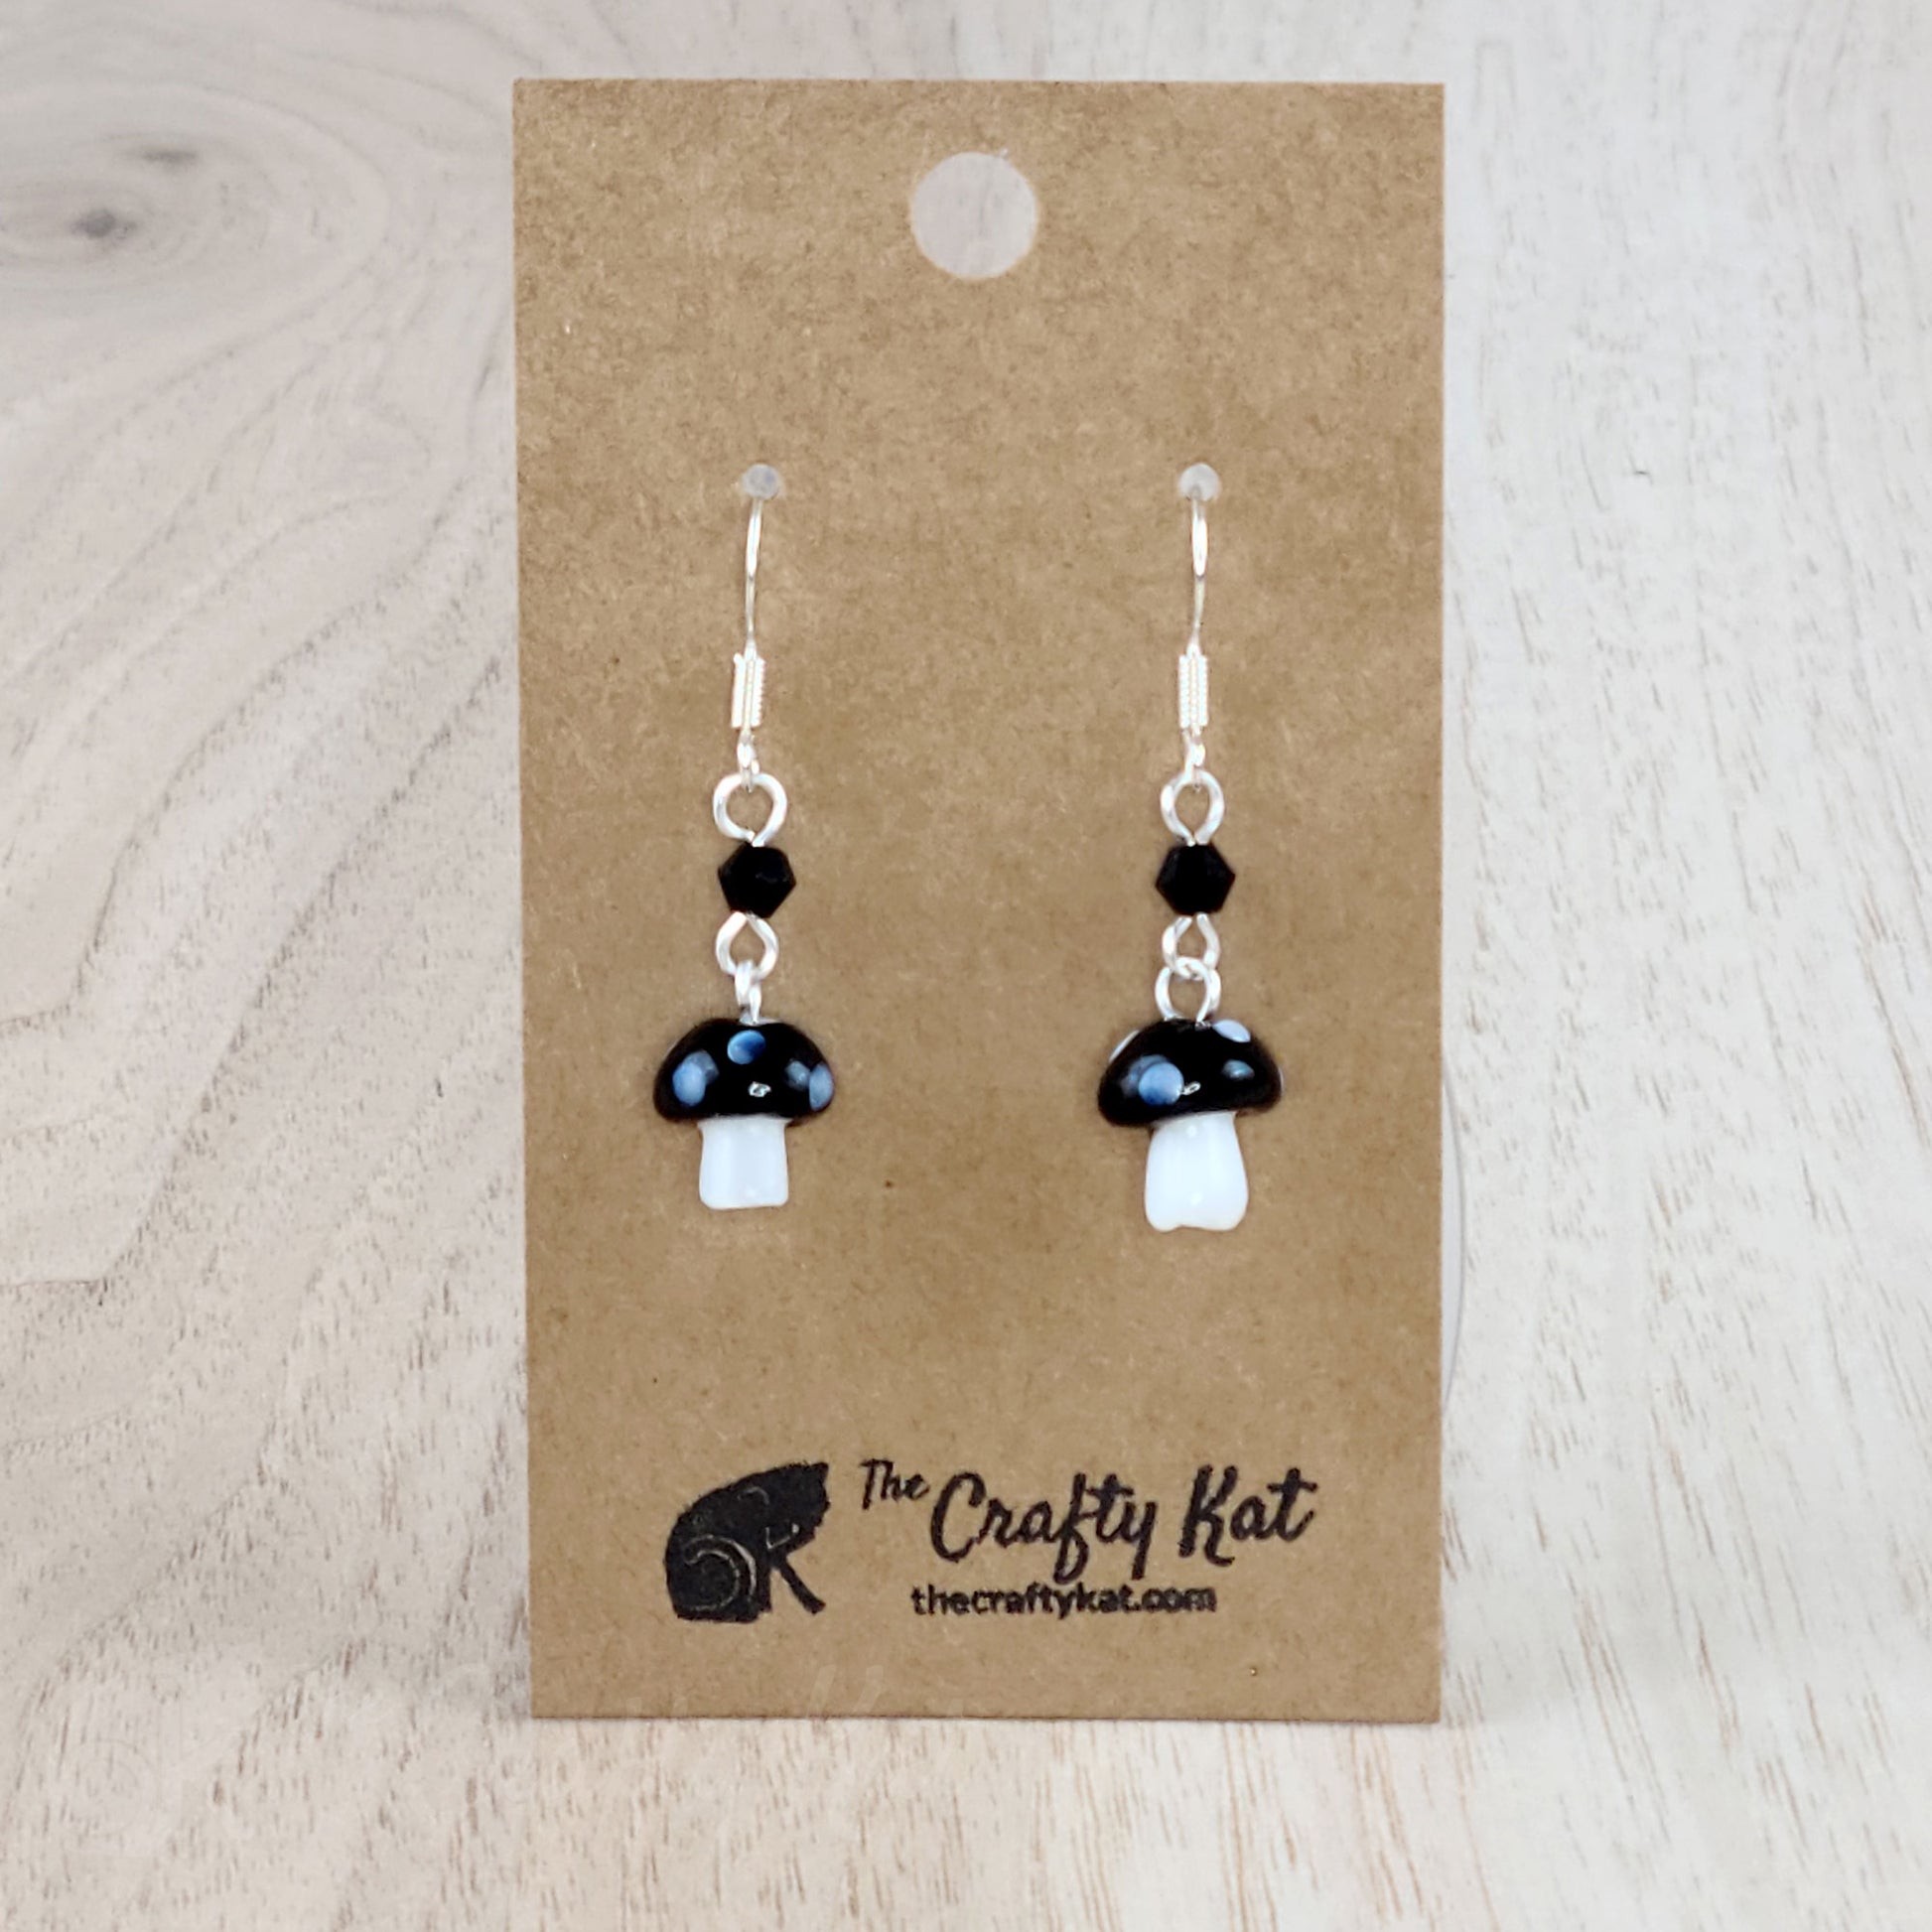 Mushroom-shaped tiered earrings made of lampwork and pressed glass beads with silver-plated base metal fittings. These mushrooms are black with white spots.